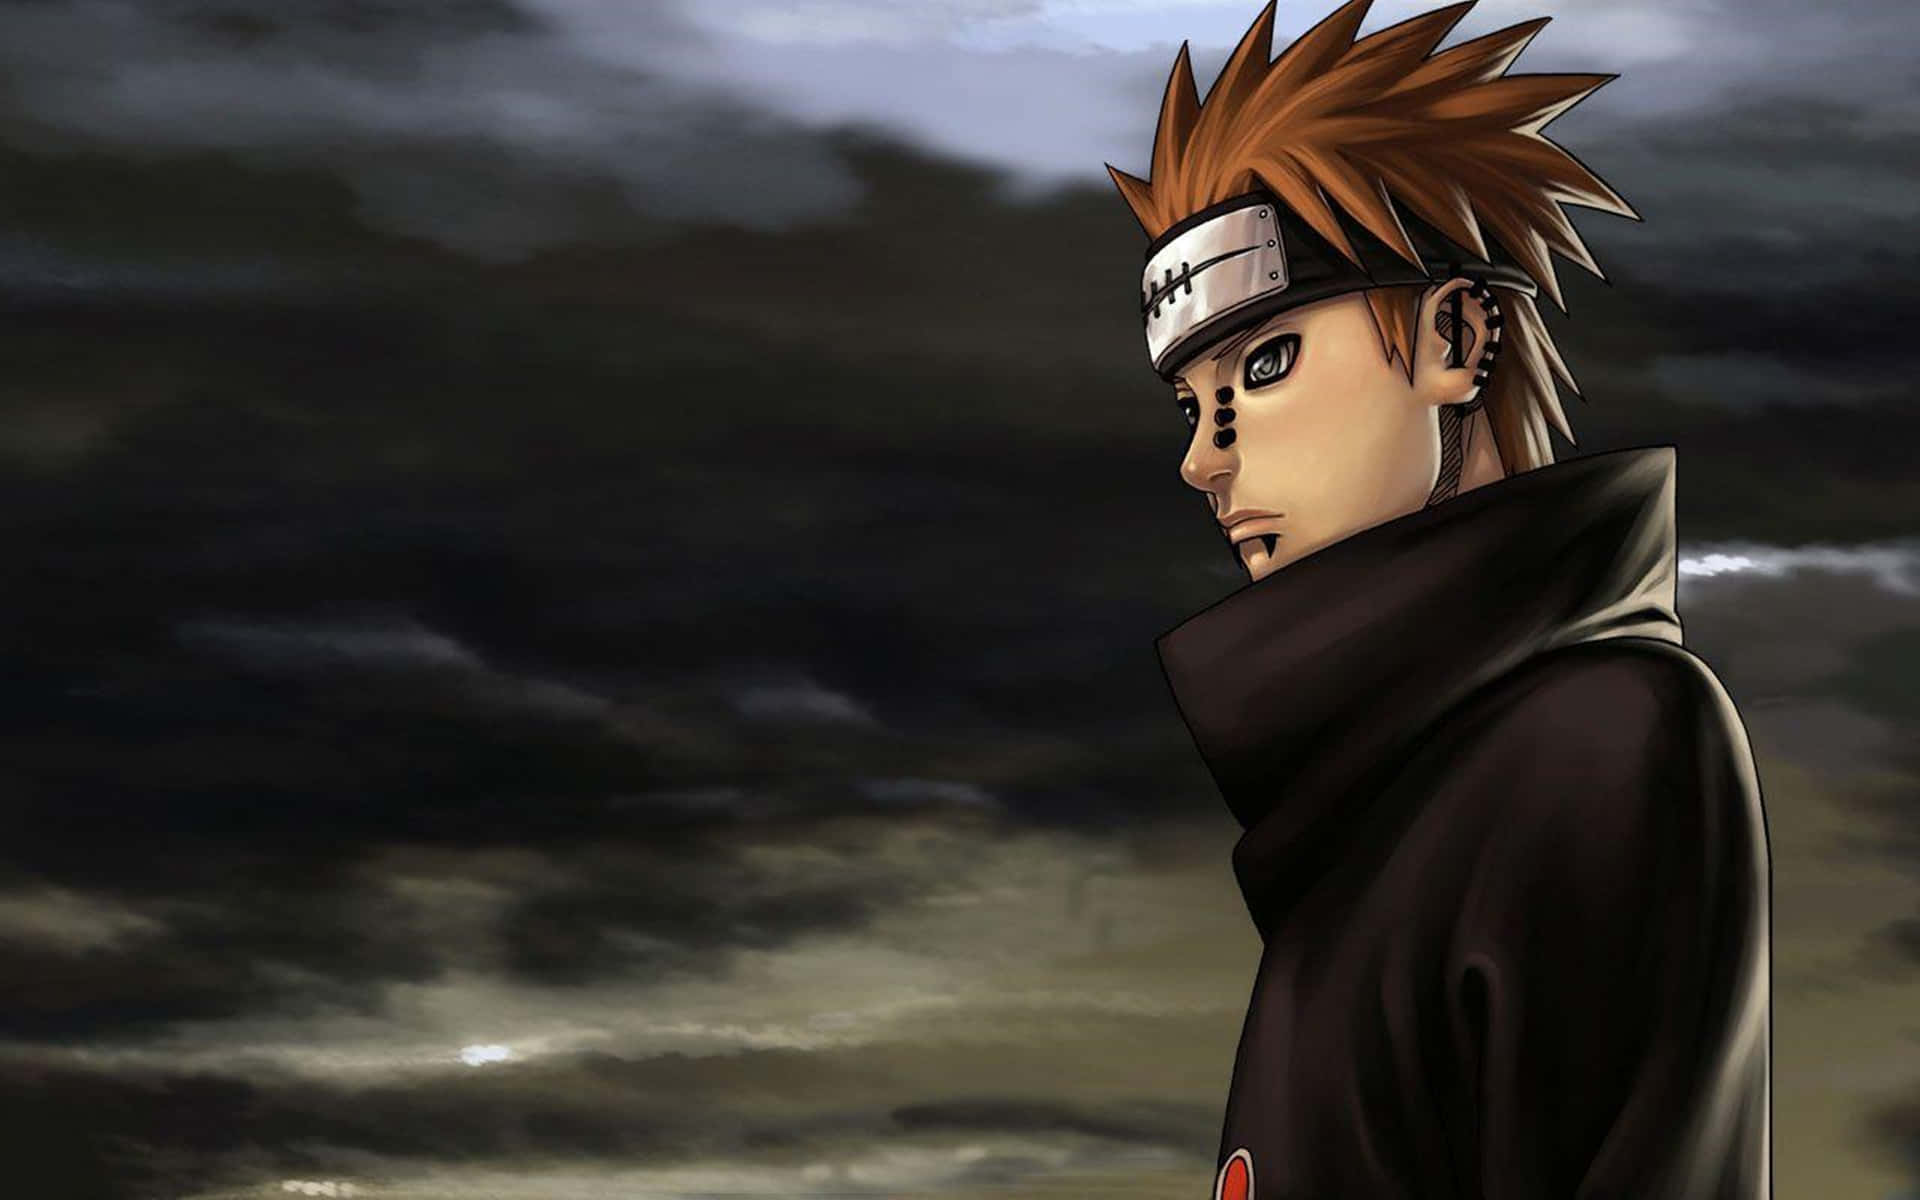 Naruto Confronts Pain In A Dramatic Moment Of Determination. Background